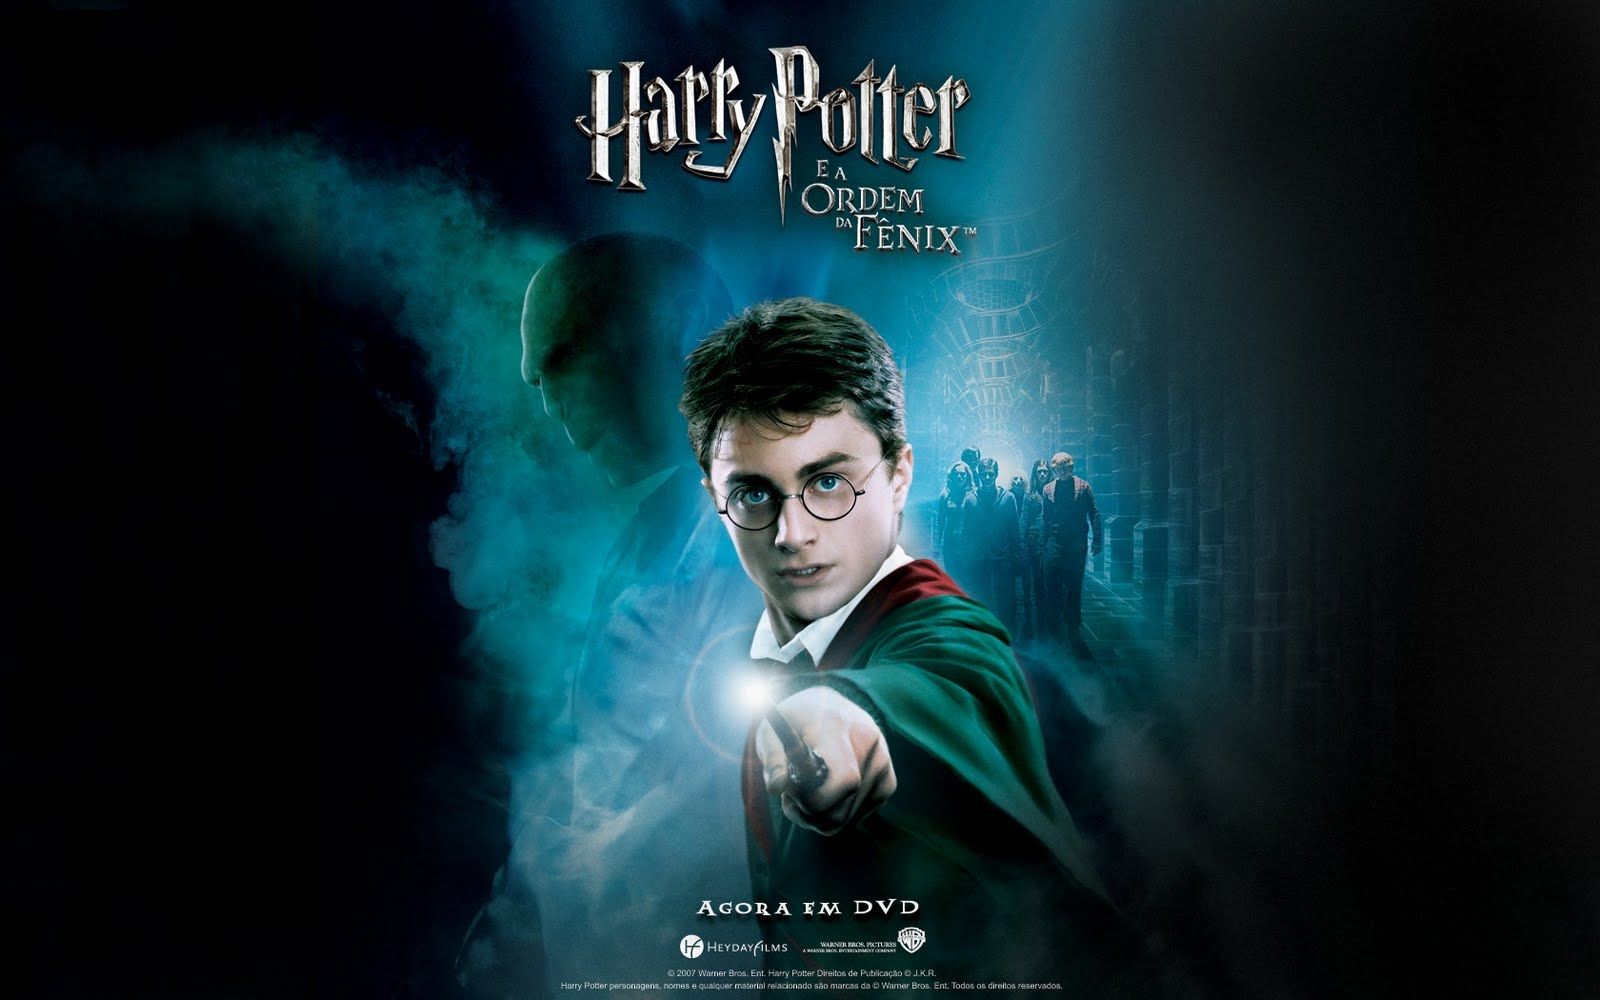 WallpaperBoard: 10 Harry Potter and the Order of the Phoenix Wallpaper